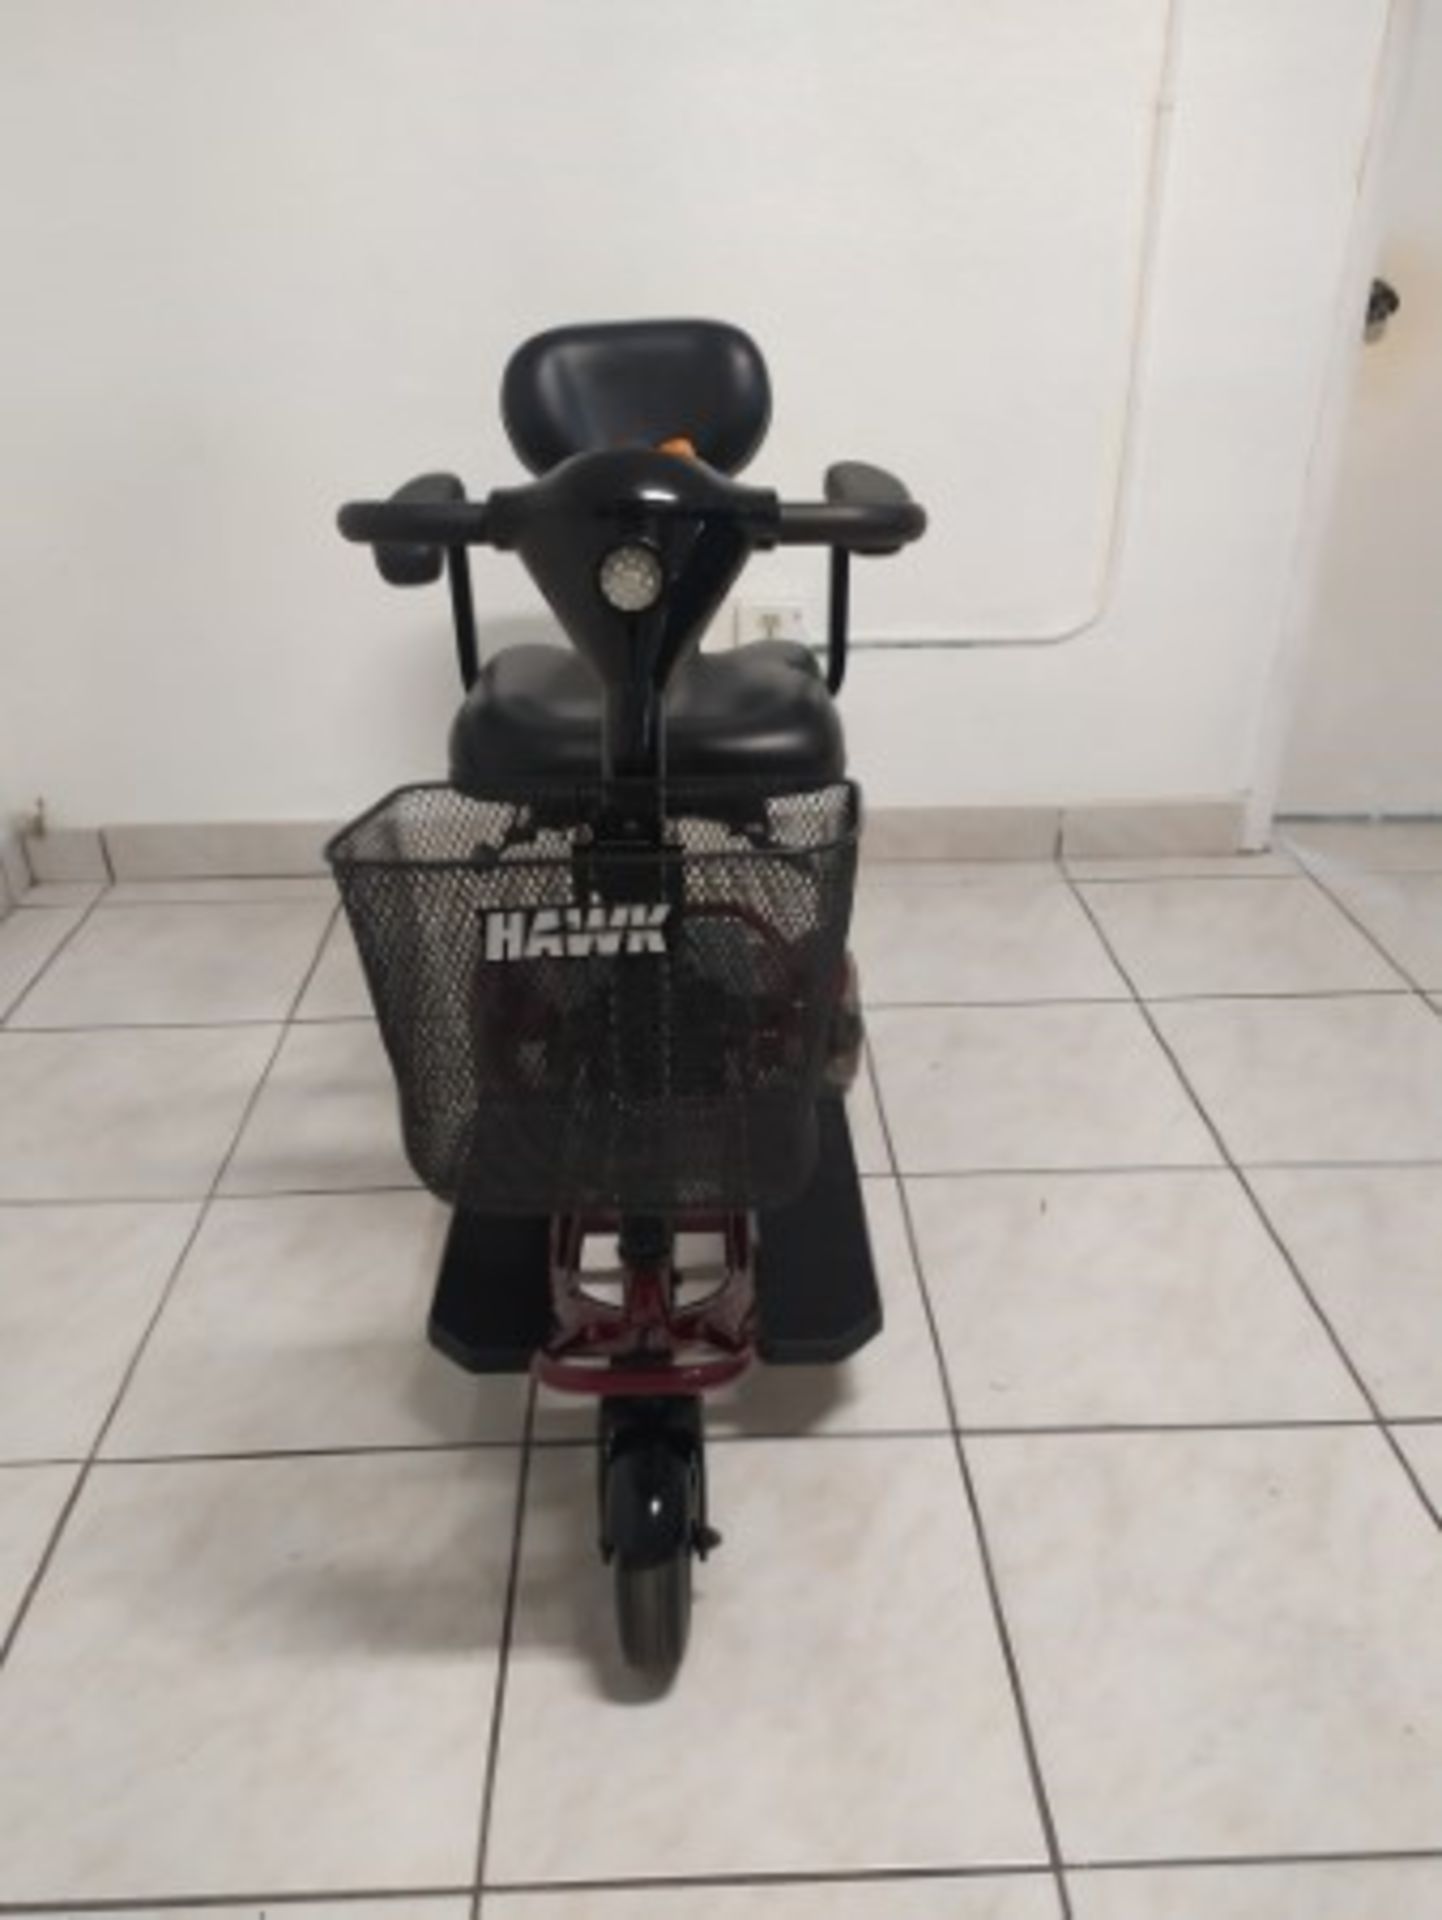 2012 DRIVE HAWK 3-WHEEL SCOOTER WITH BASKET - RED - 250LB CAPACITY - SERIAL No. 2A07030128 (NO CHARG